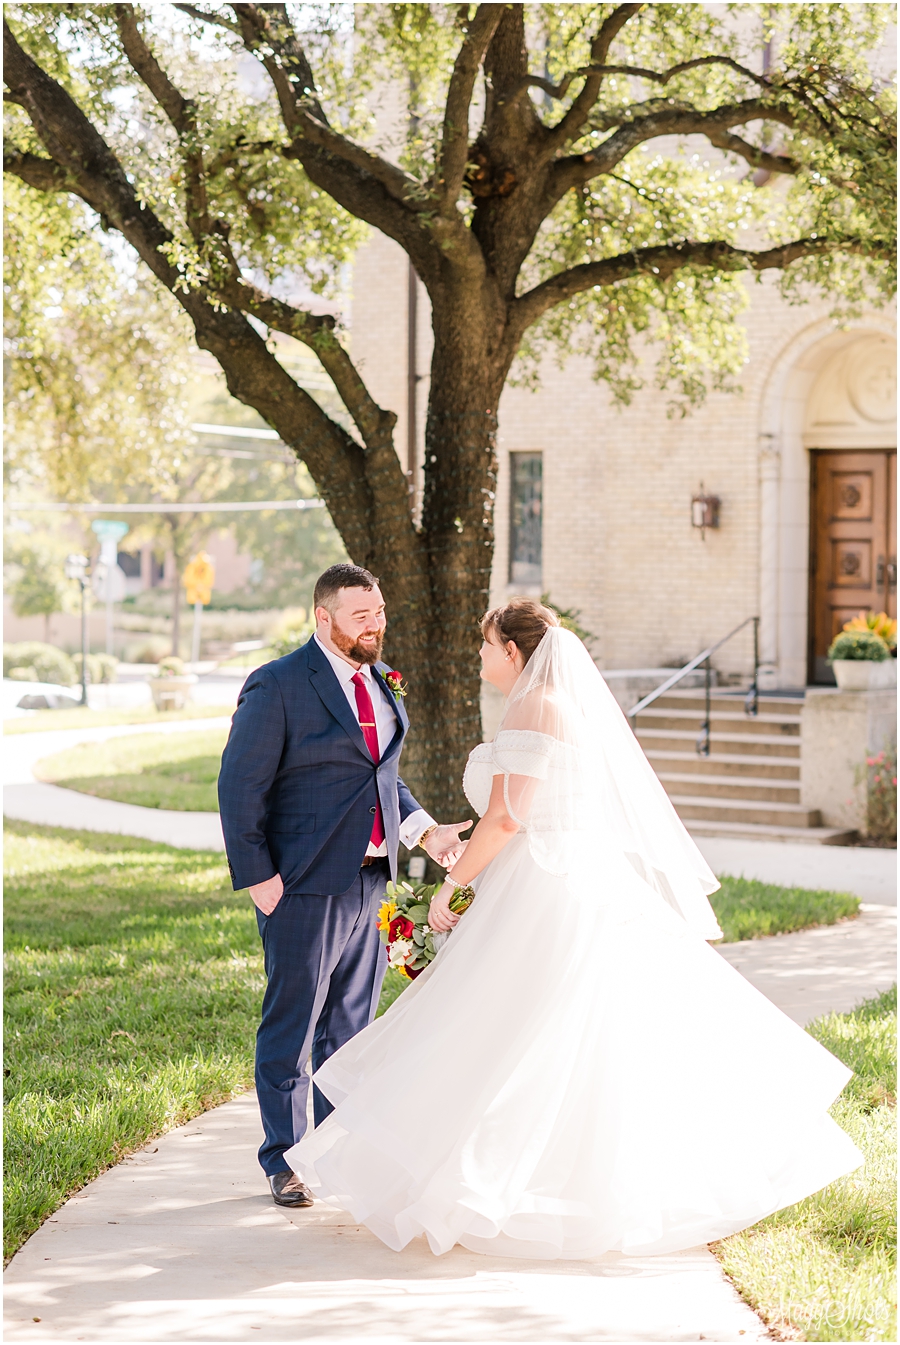 MaggShots Photography, DFW Wedding Photographer, Belo Mansion, Wedding Photographer, Belo Mansion, Wedding Photographer, Dallas wedding, Belo Mansion Wedding, Trinity Groves Engagement, Klyde Warren Park Engagement, Trinity Groves Photographyer, bride and groom, just married, romantics